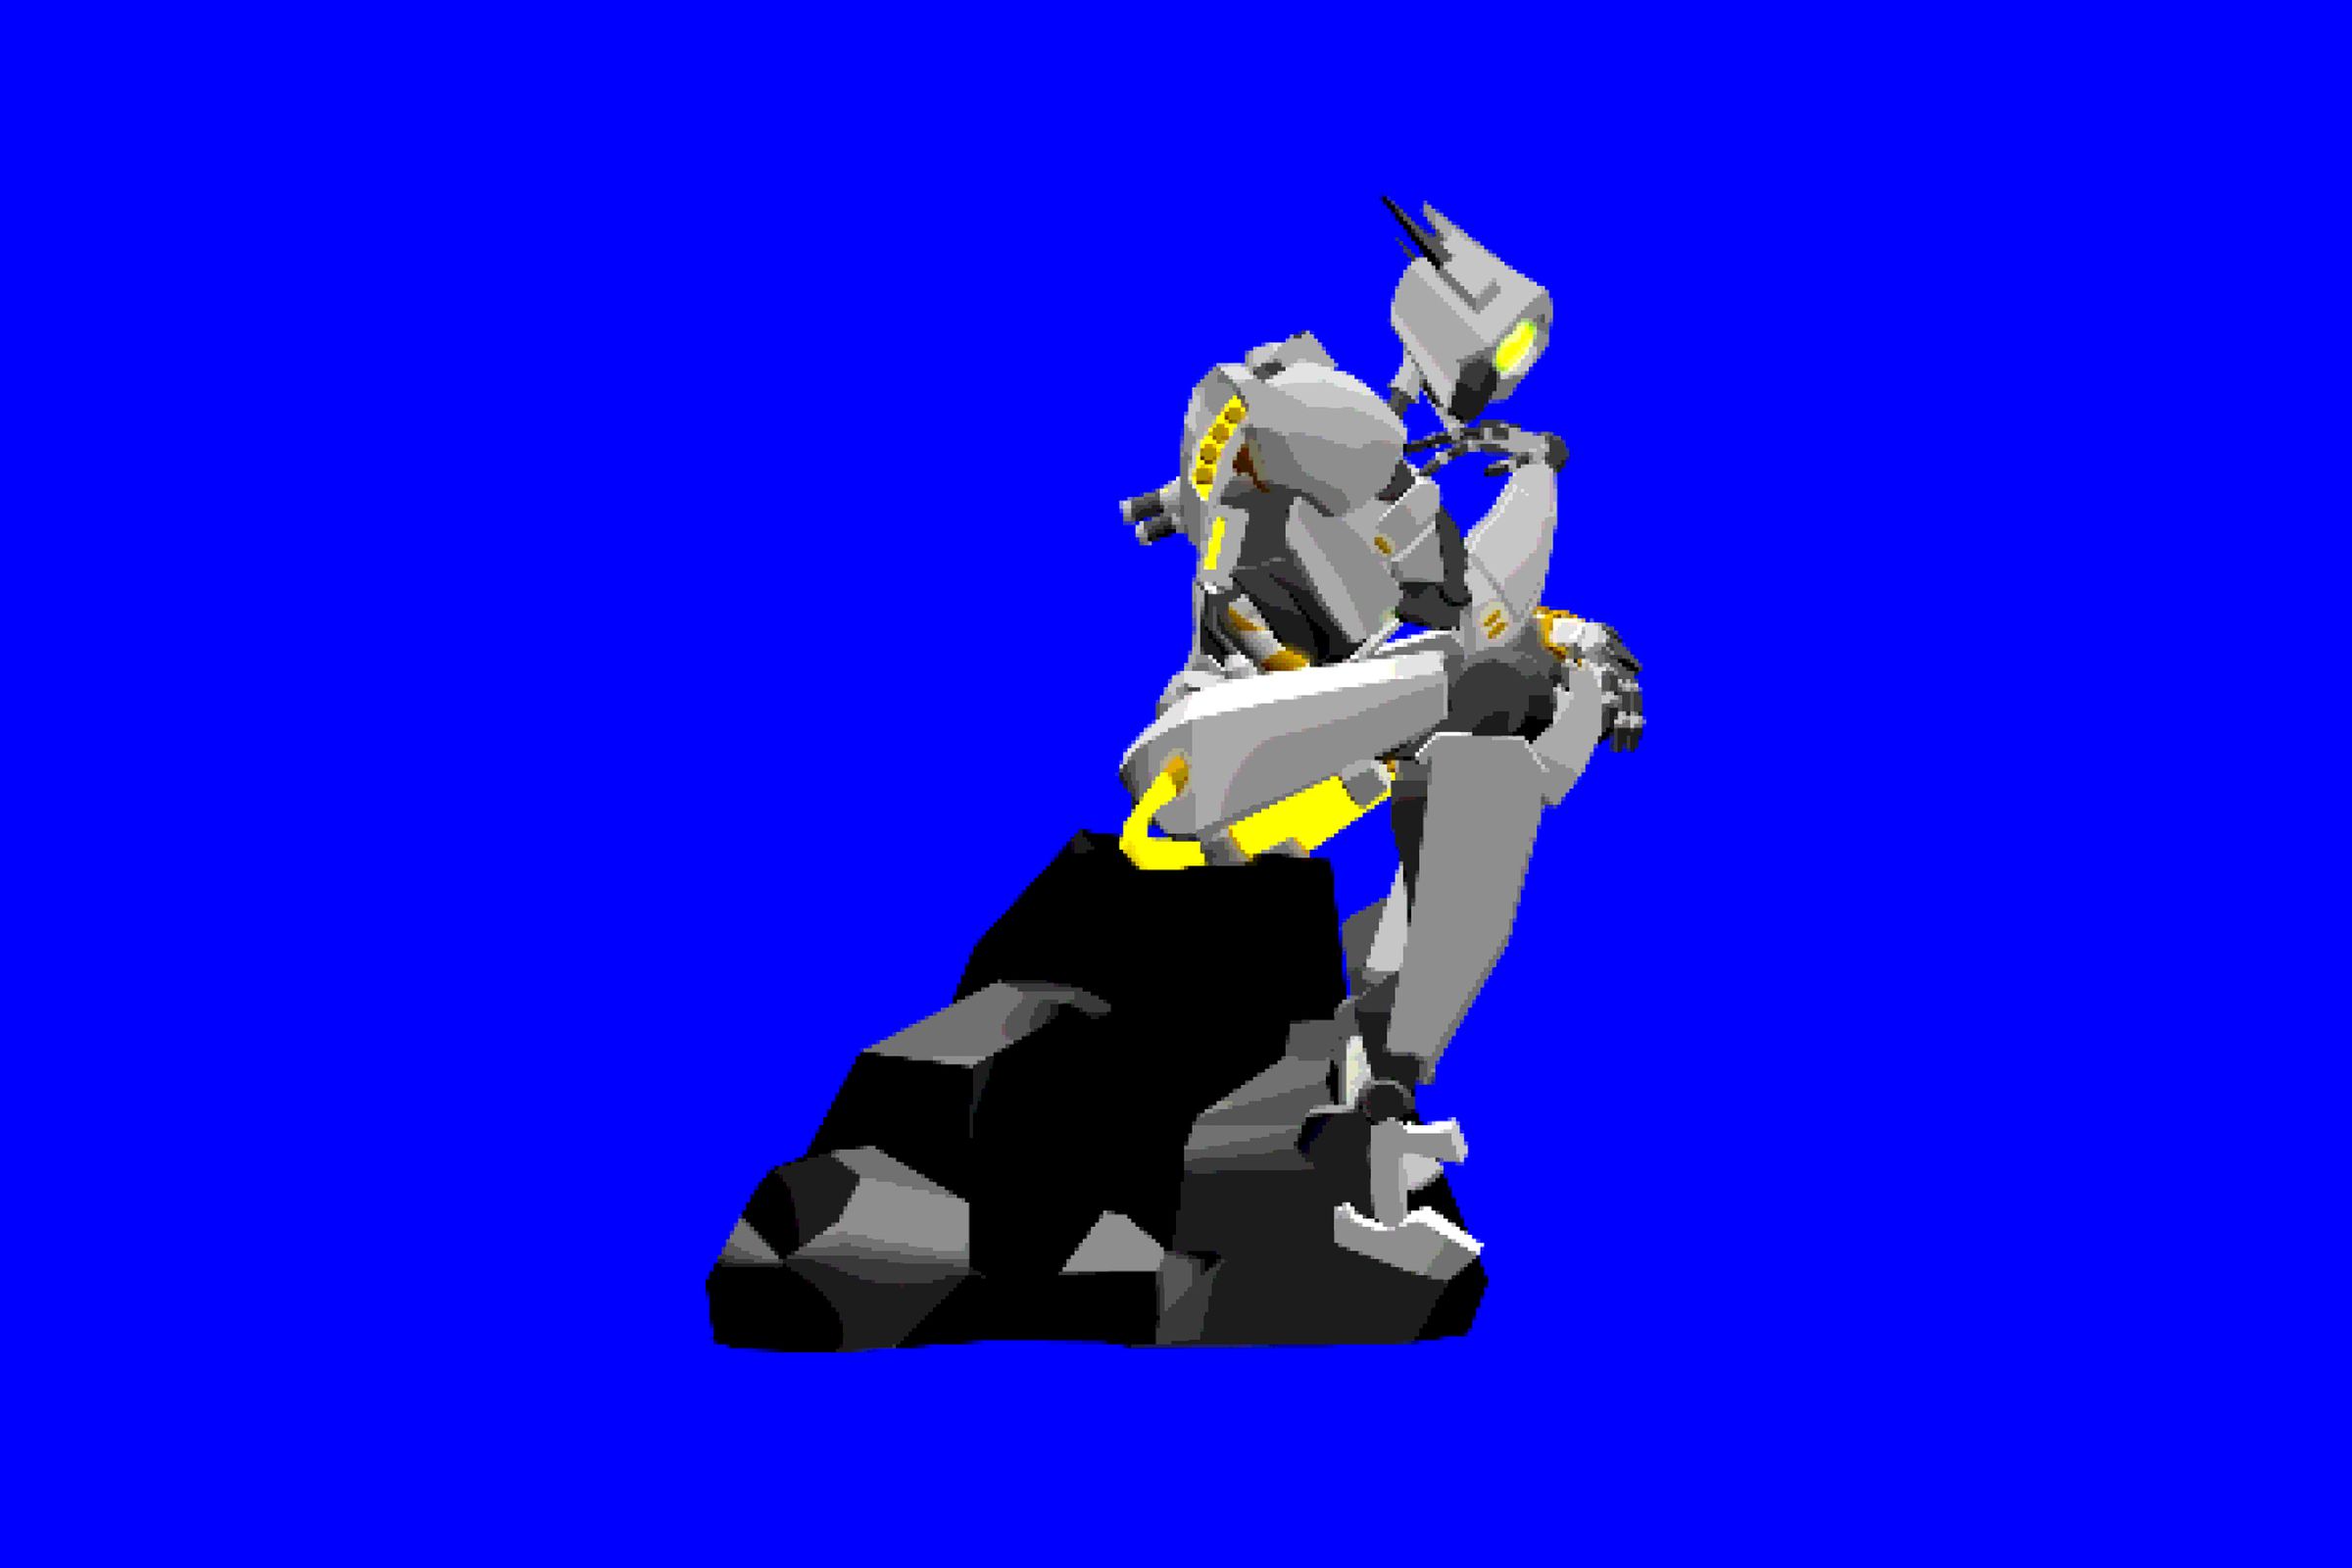 3D illustration of a robot version of “The Thinker”.